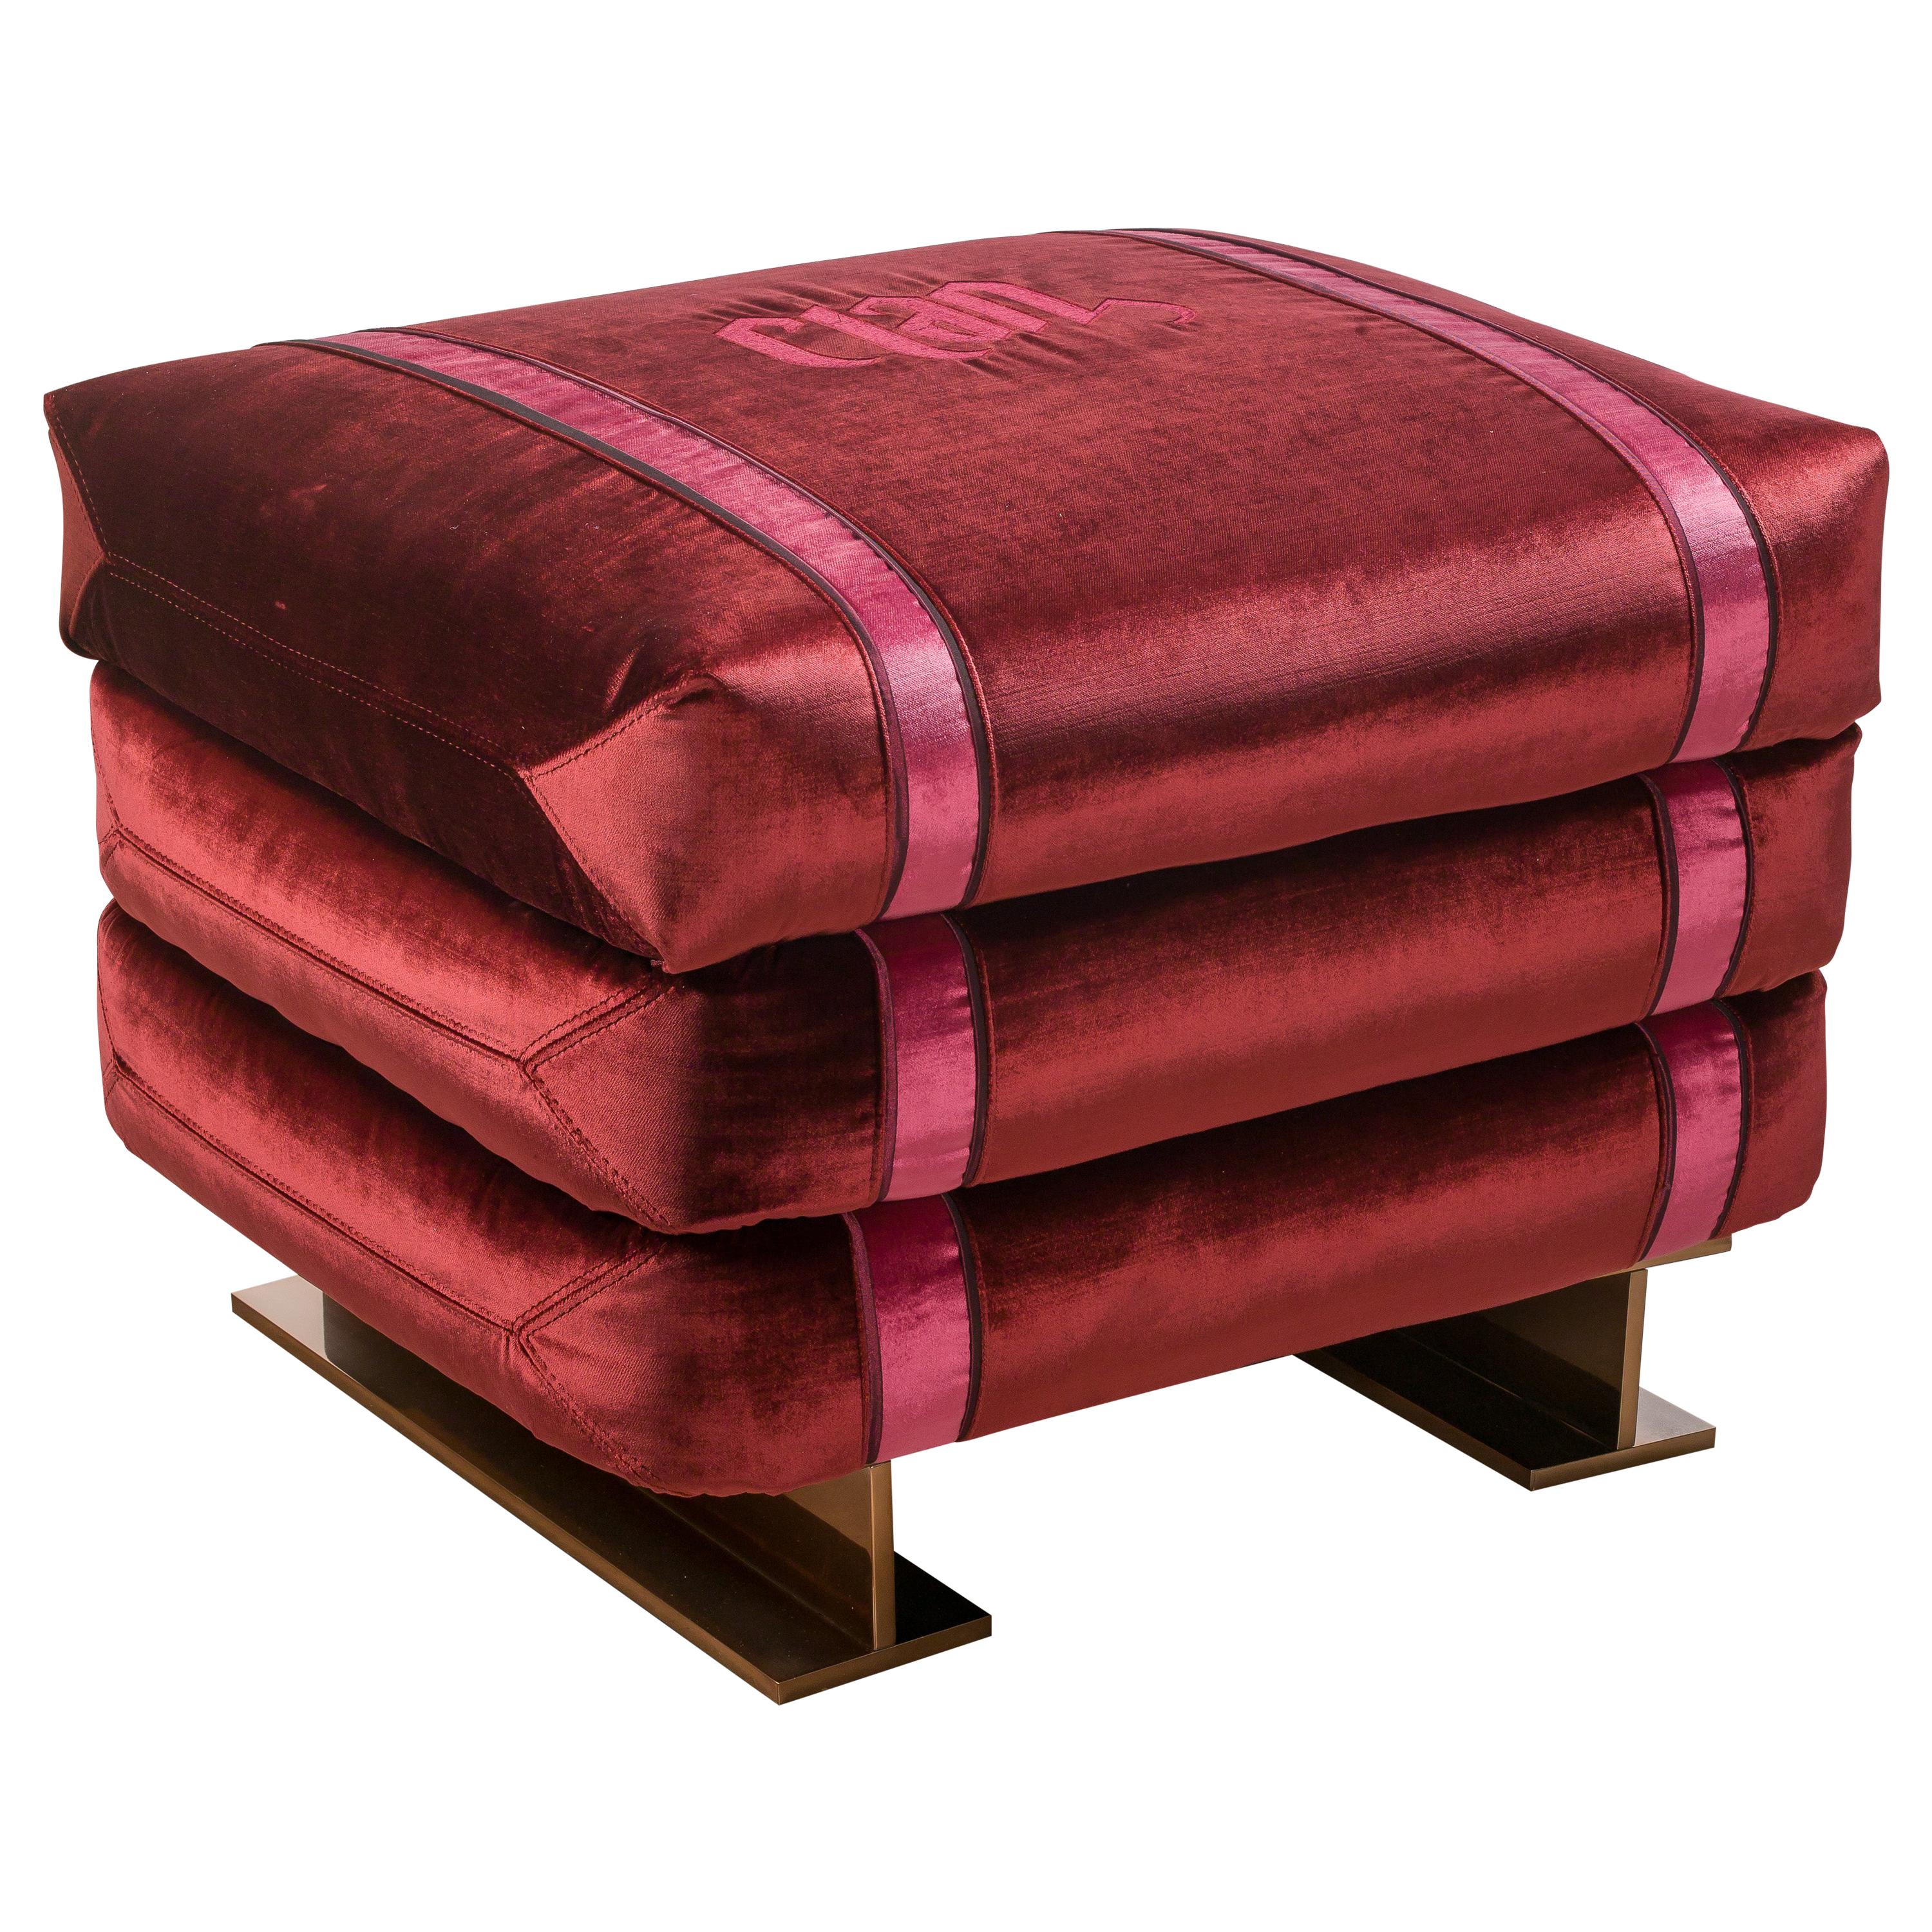 Sacco, Fashion Pouf in Cement Boxes Shape